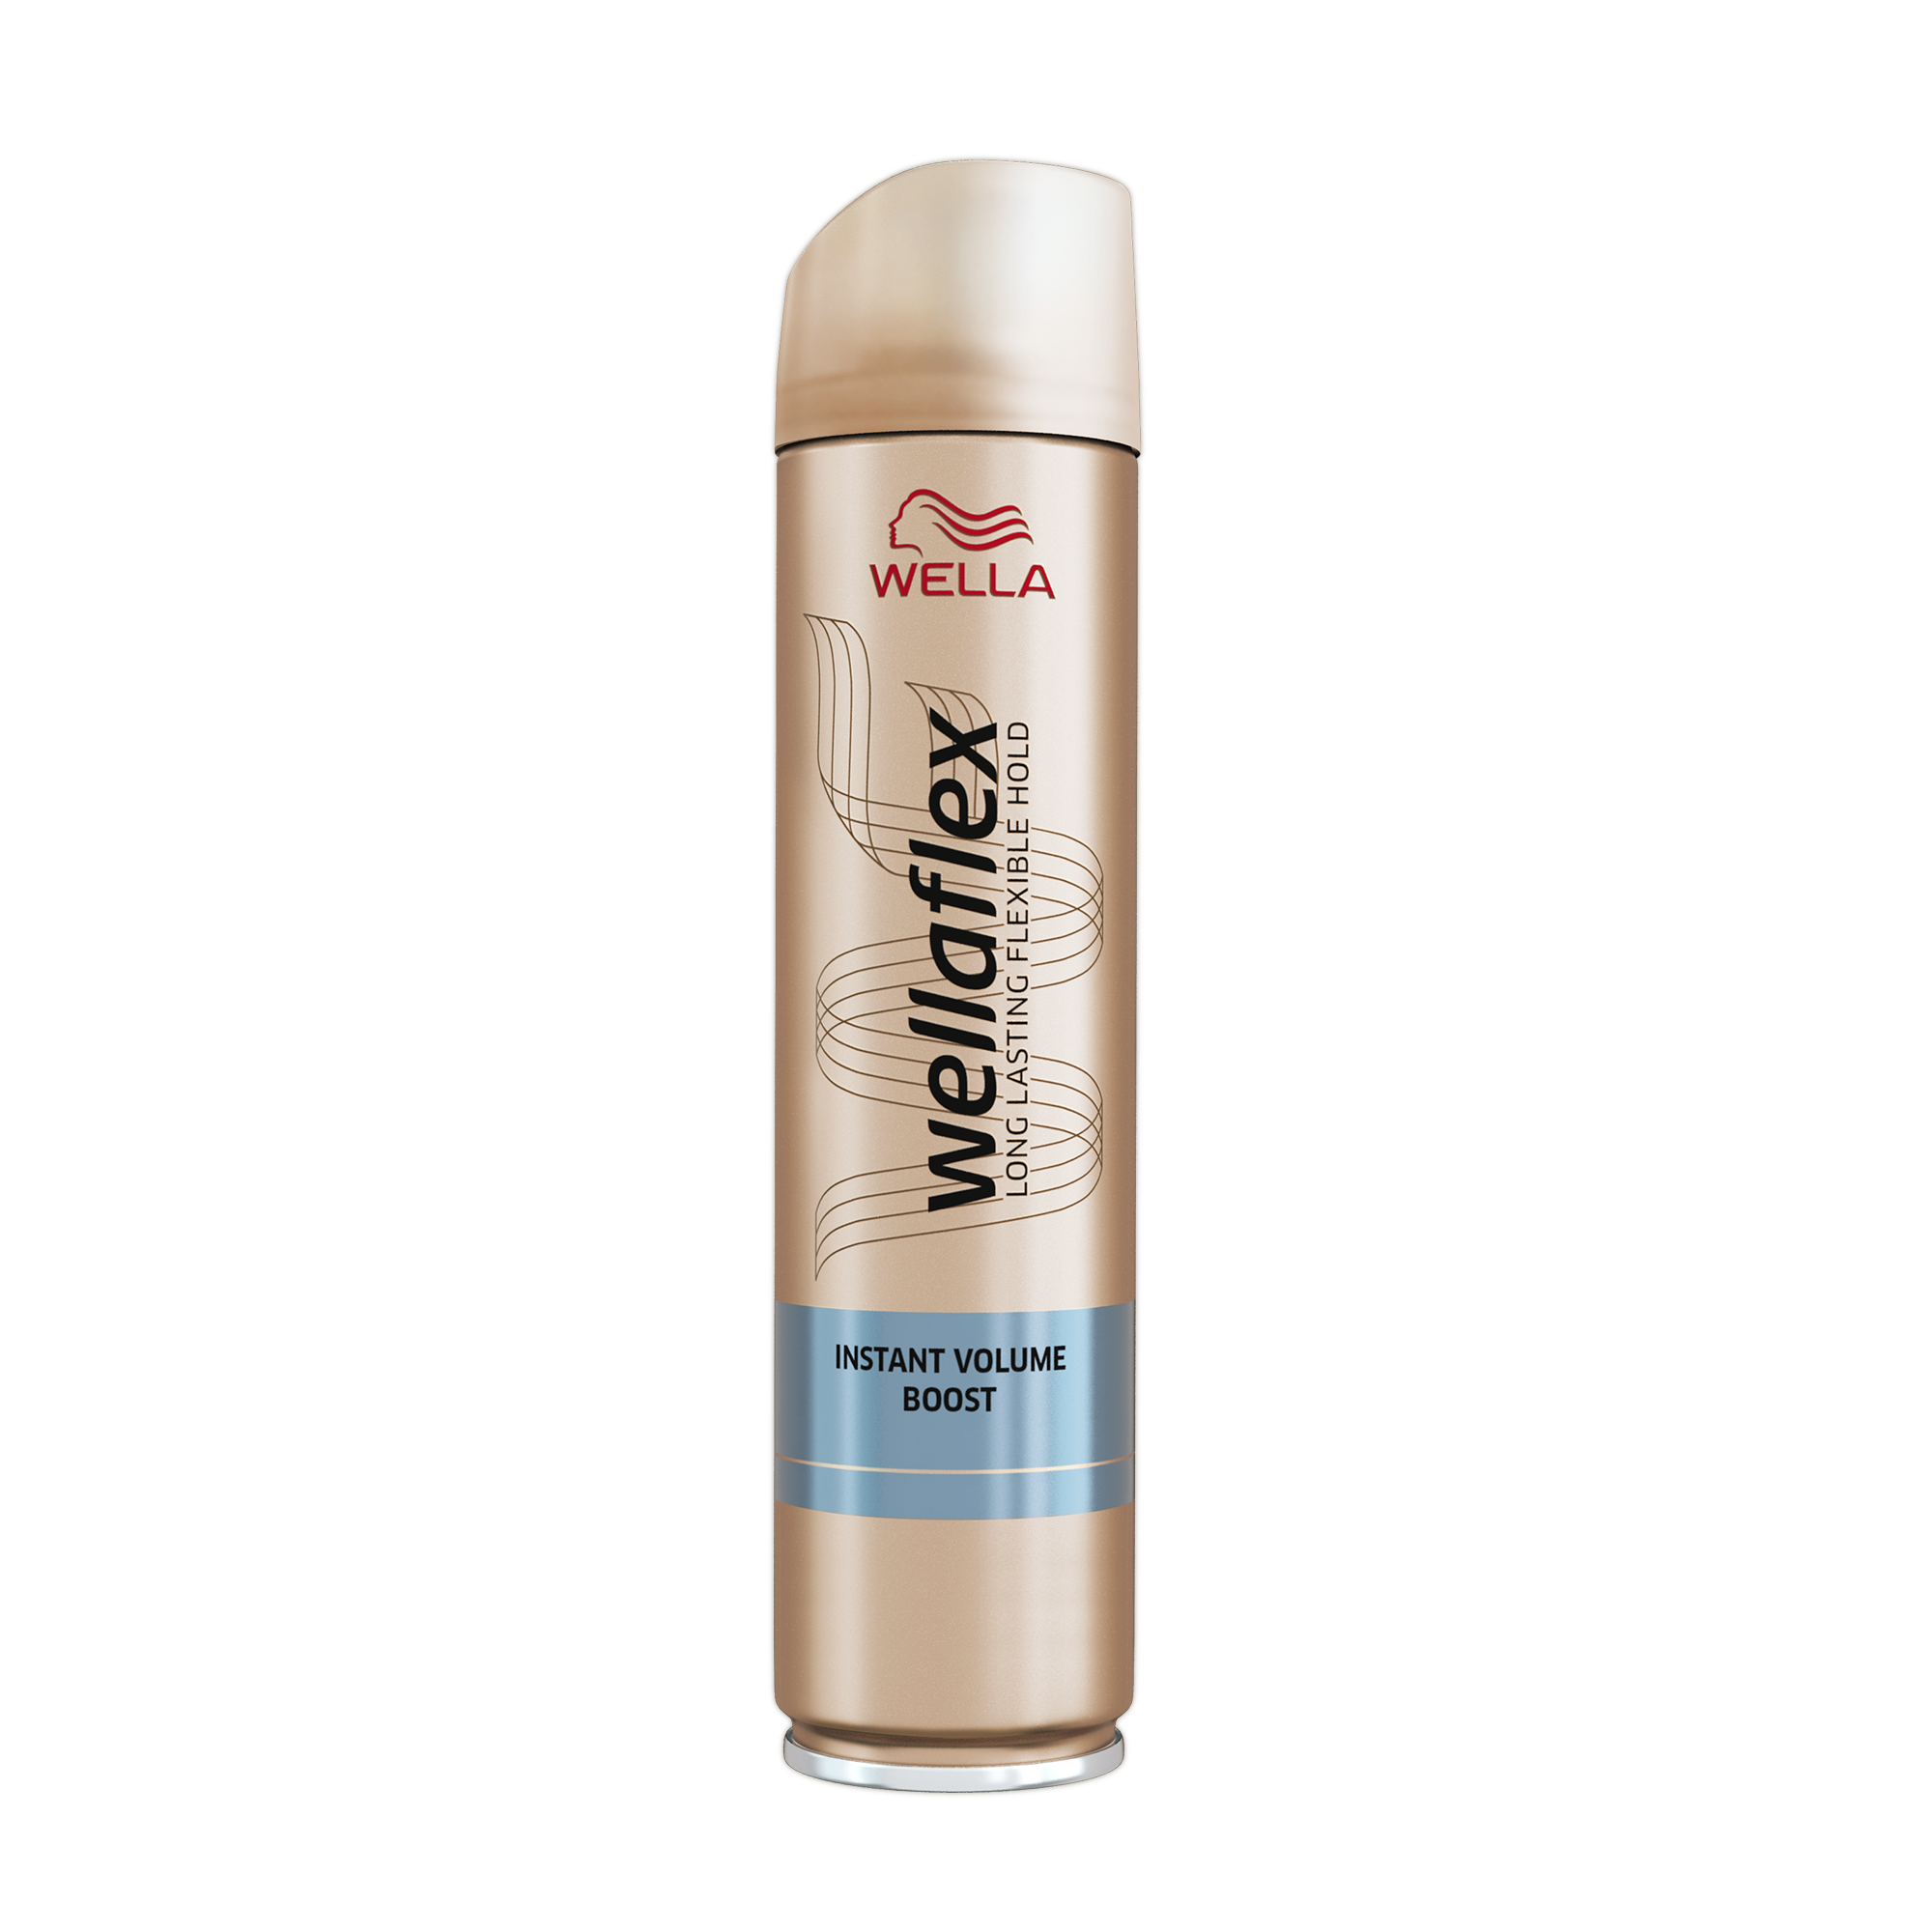 https://www.wella.com/sites/default/files/products/wellaflex-instant-volume-boost-extra-strong-hold-hairspray-hold-45-250-ml.png